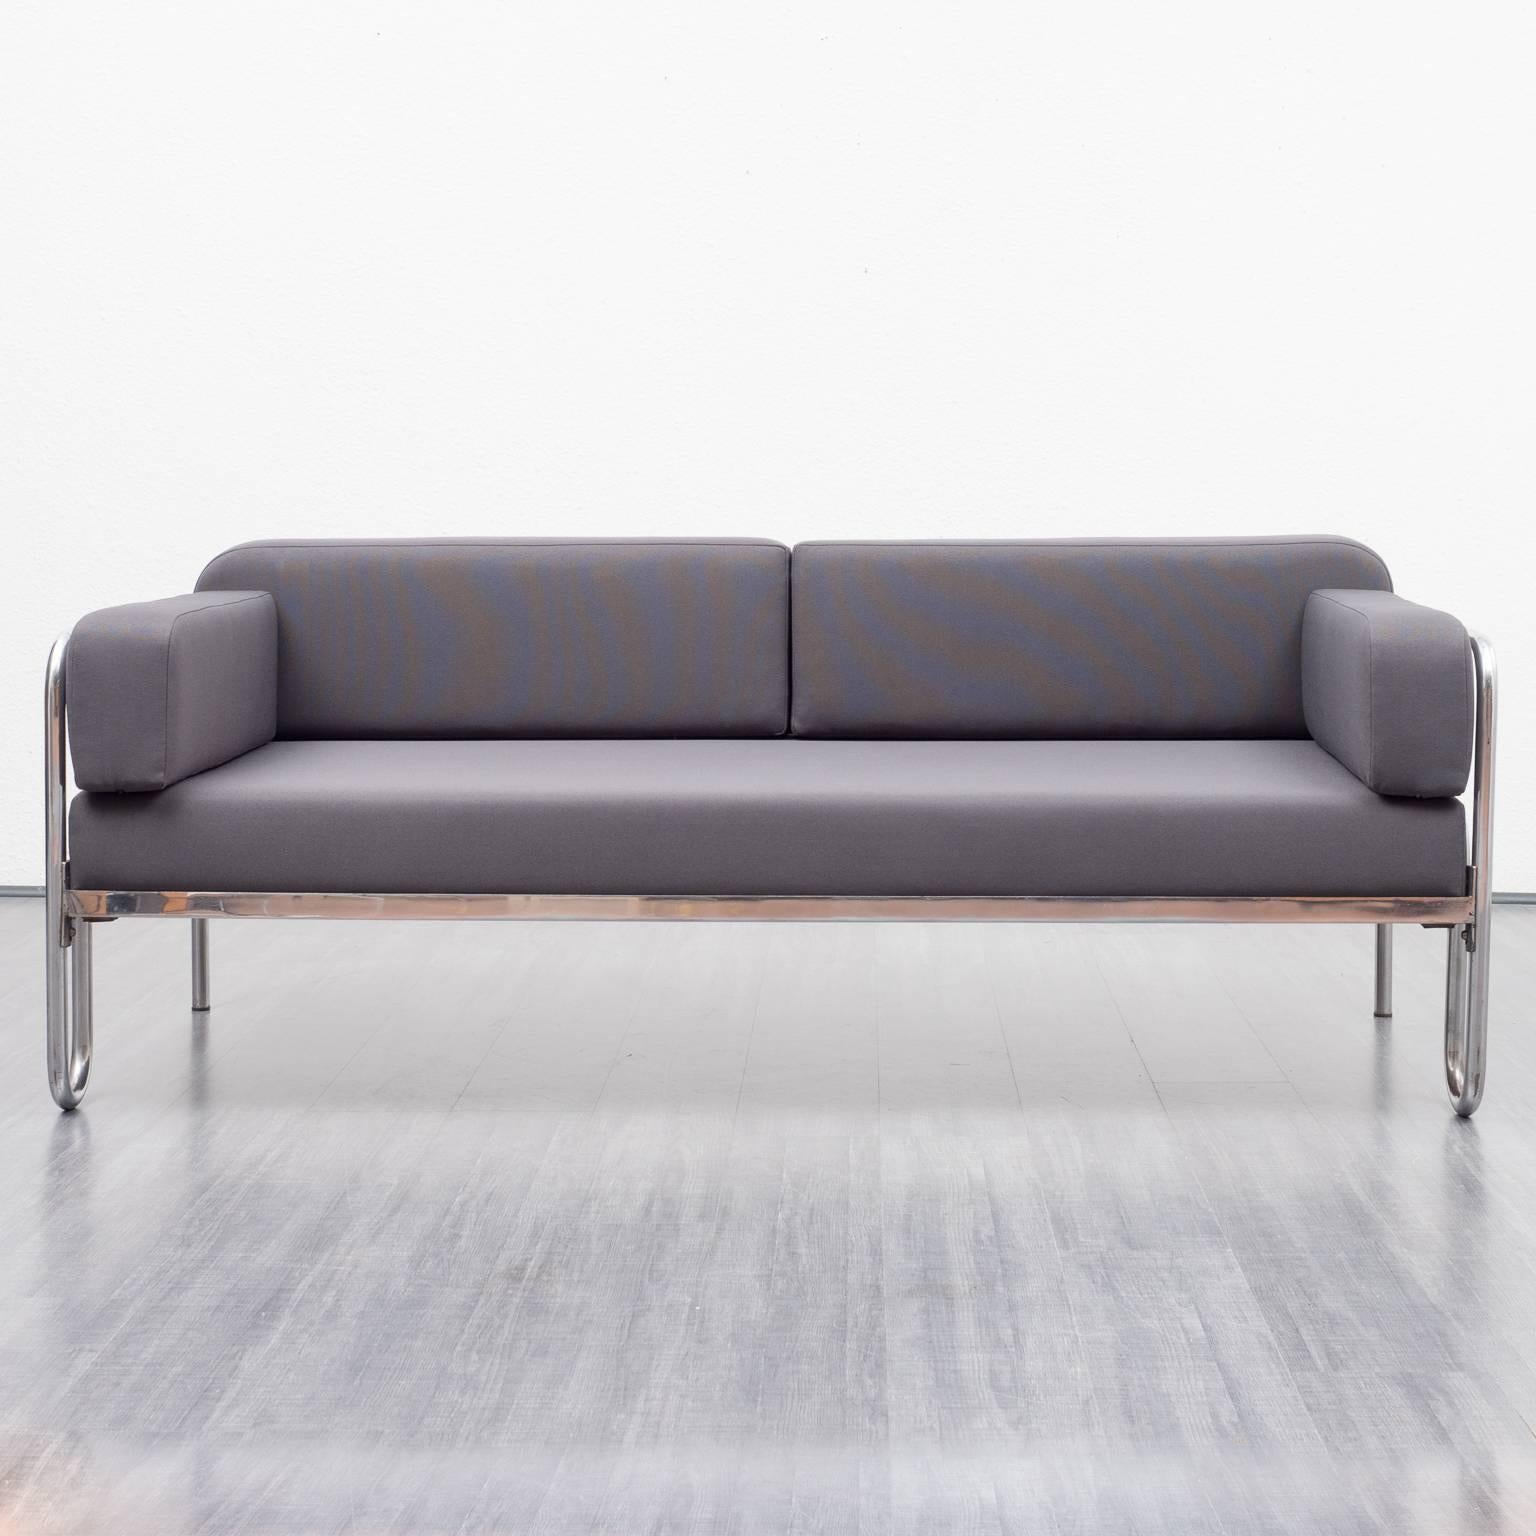 A lovingly restored Classic: Straight-lined daybed made of an original 1930s bed with steel tube frame. Nice shape, Bauhaus design. The comfy lying surface and cushions were professionally reupholstered with new foam and covered with a high-quality